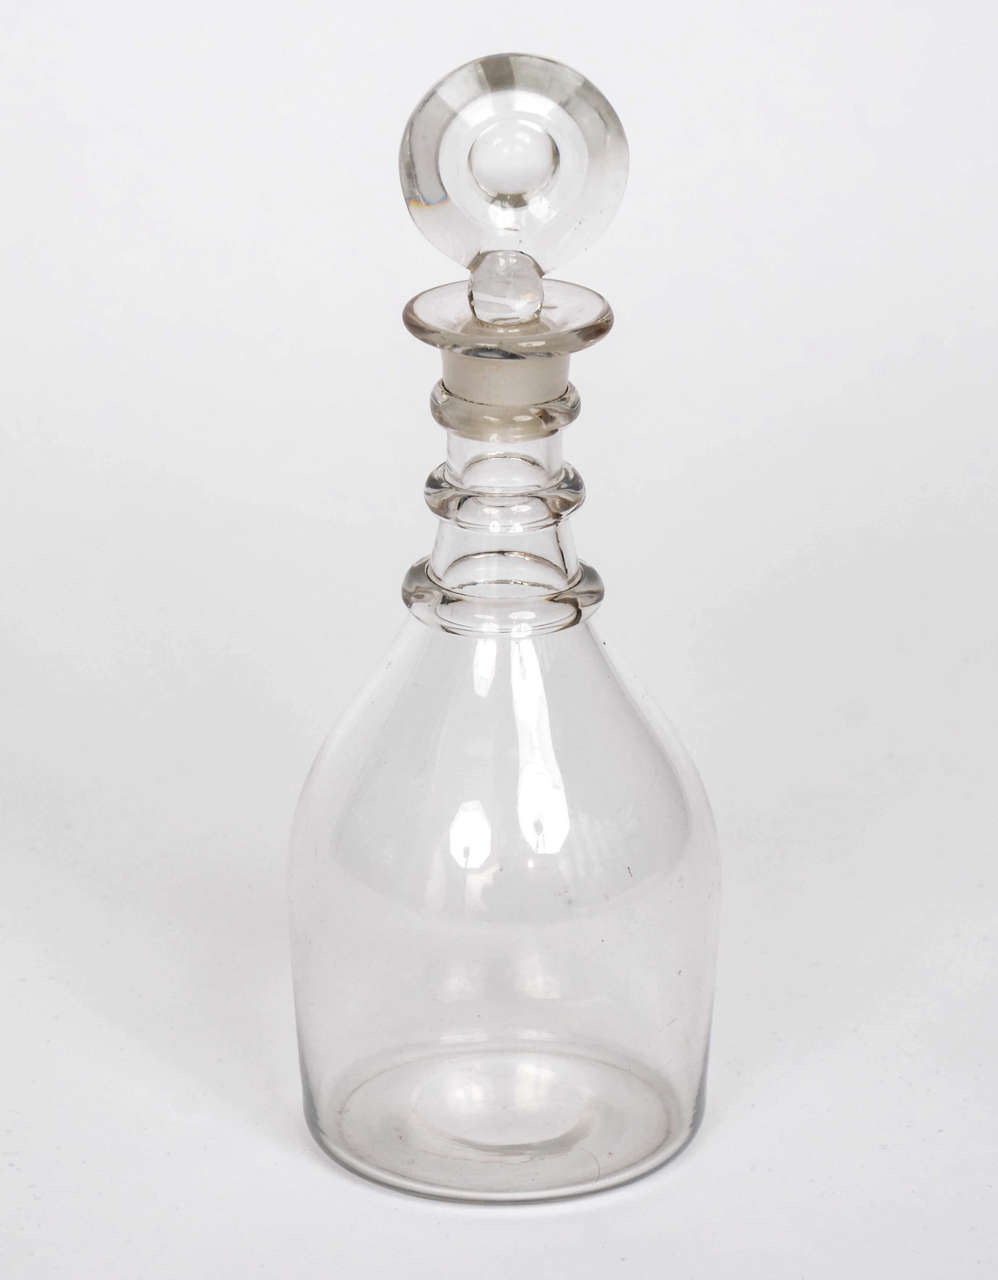 This is an English, hand-blown, Lead Glass Decanter from the Late 18th Century

The decanter has a 